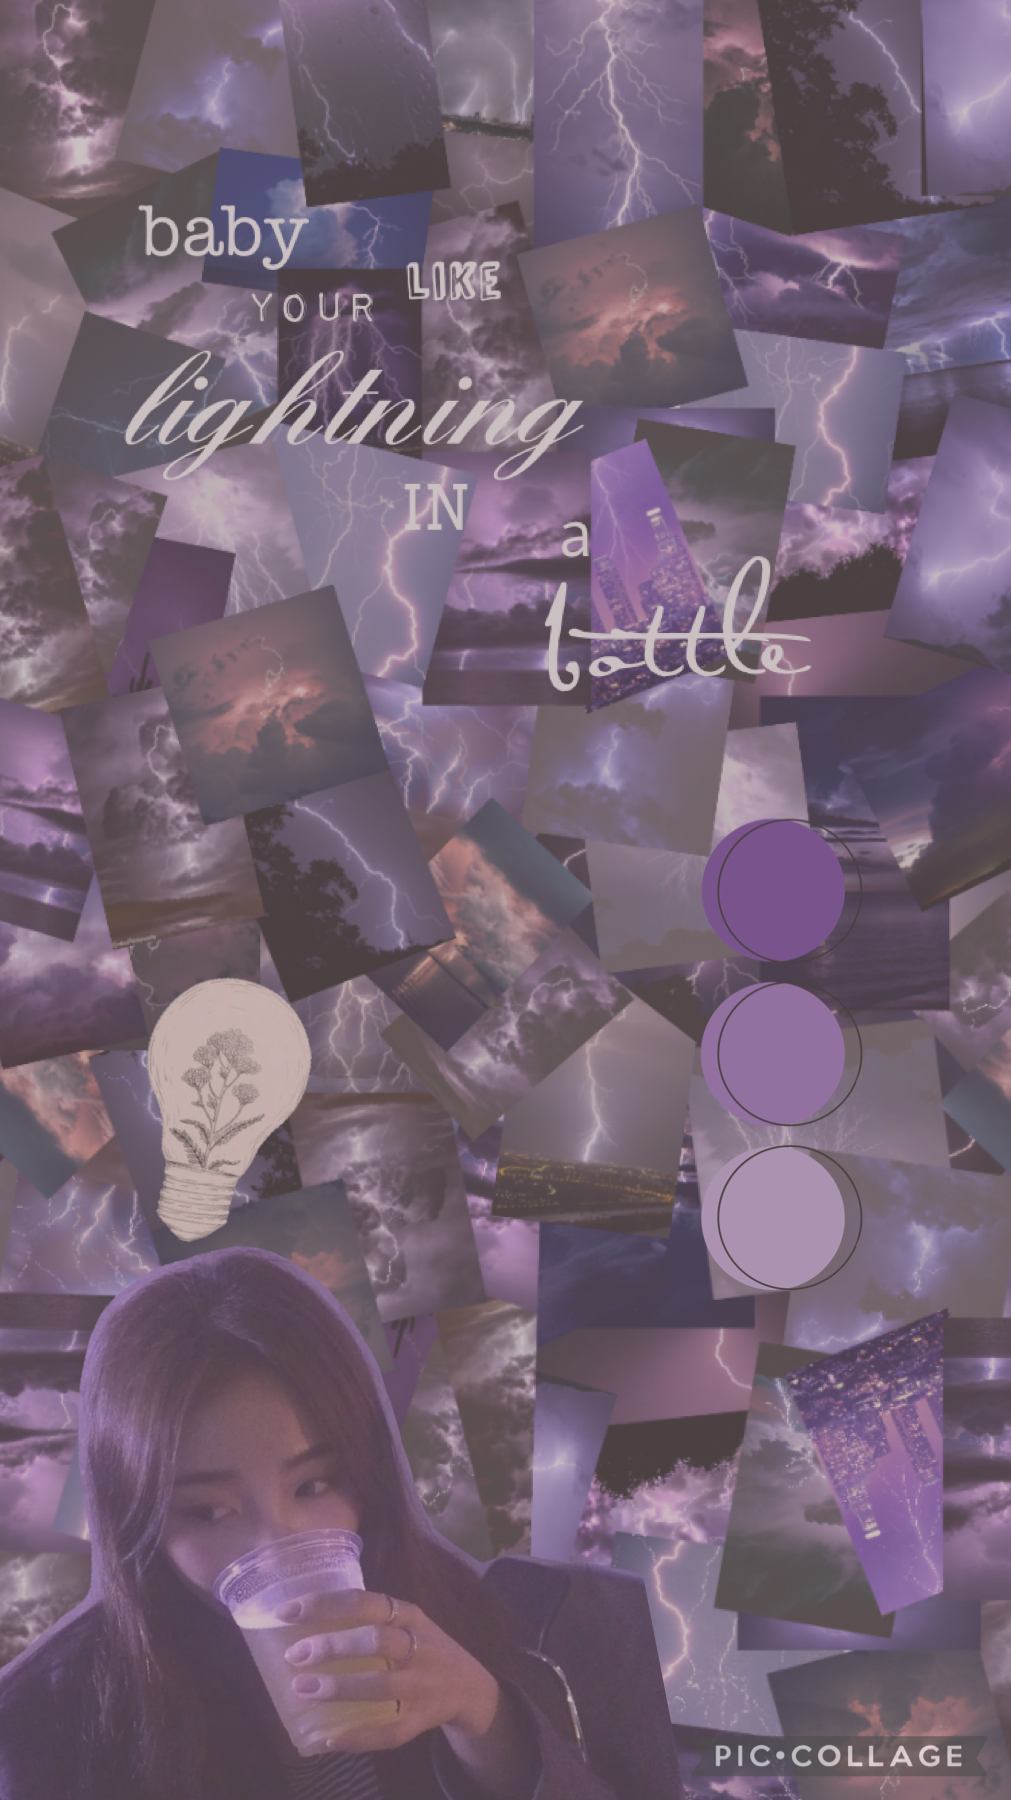 🔮tap🔮
Hello sunshiners 💜
Song ~ Electric love by BØRNS 
Thank you for the support on my previous collage, it means so much. 
Keep shining and have a great week
- xox sunshine-daydreams 💜